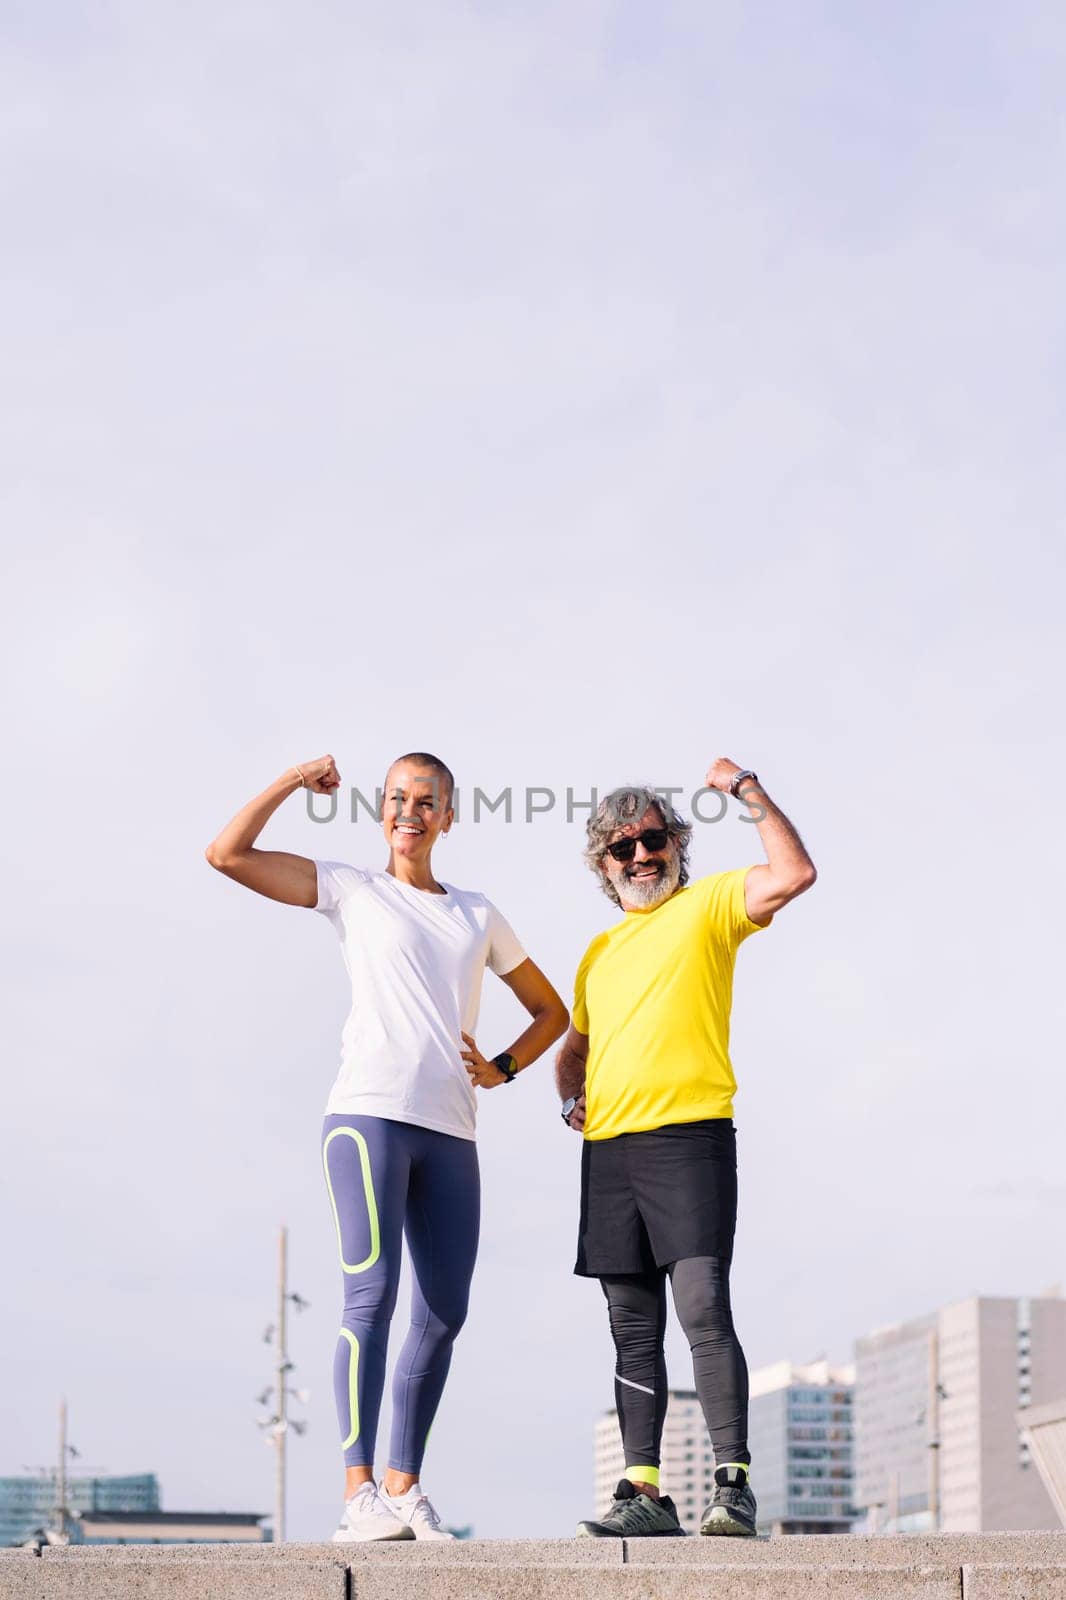 senior man and his personal trainer posing flexing muscle and smiling happy looking at camera, concept of active and healthy lifestyle in middle age, copy space for text